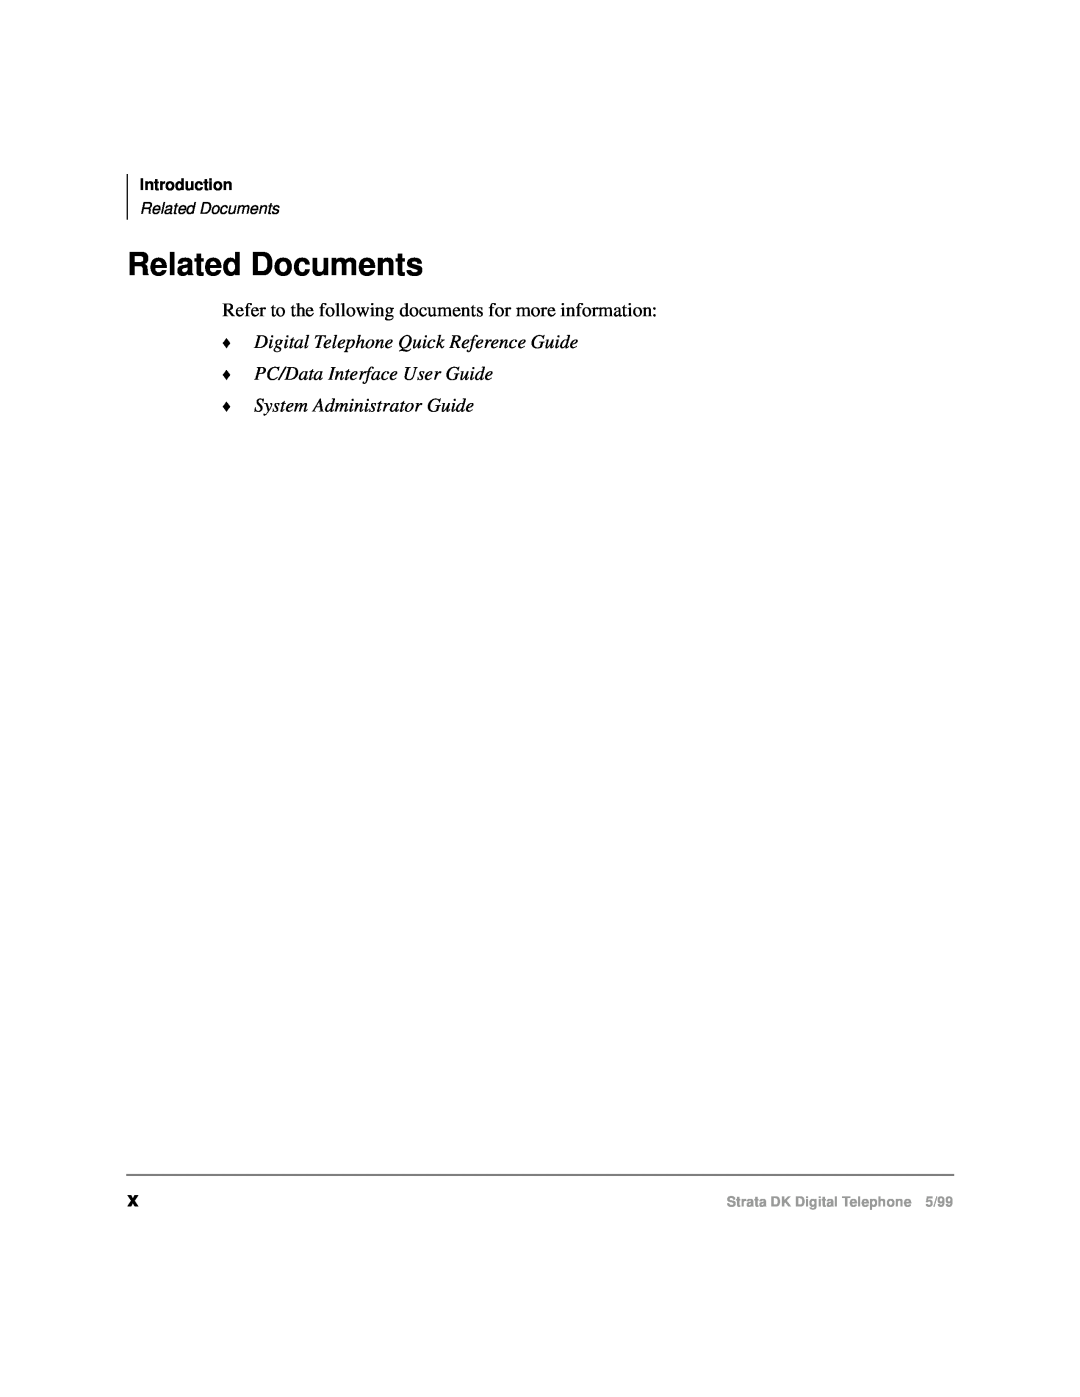 Toshiba CT manual Related Documents, Digital Telephone Quick Reference Guide PC/Data Interface User Guide 